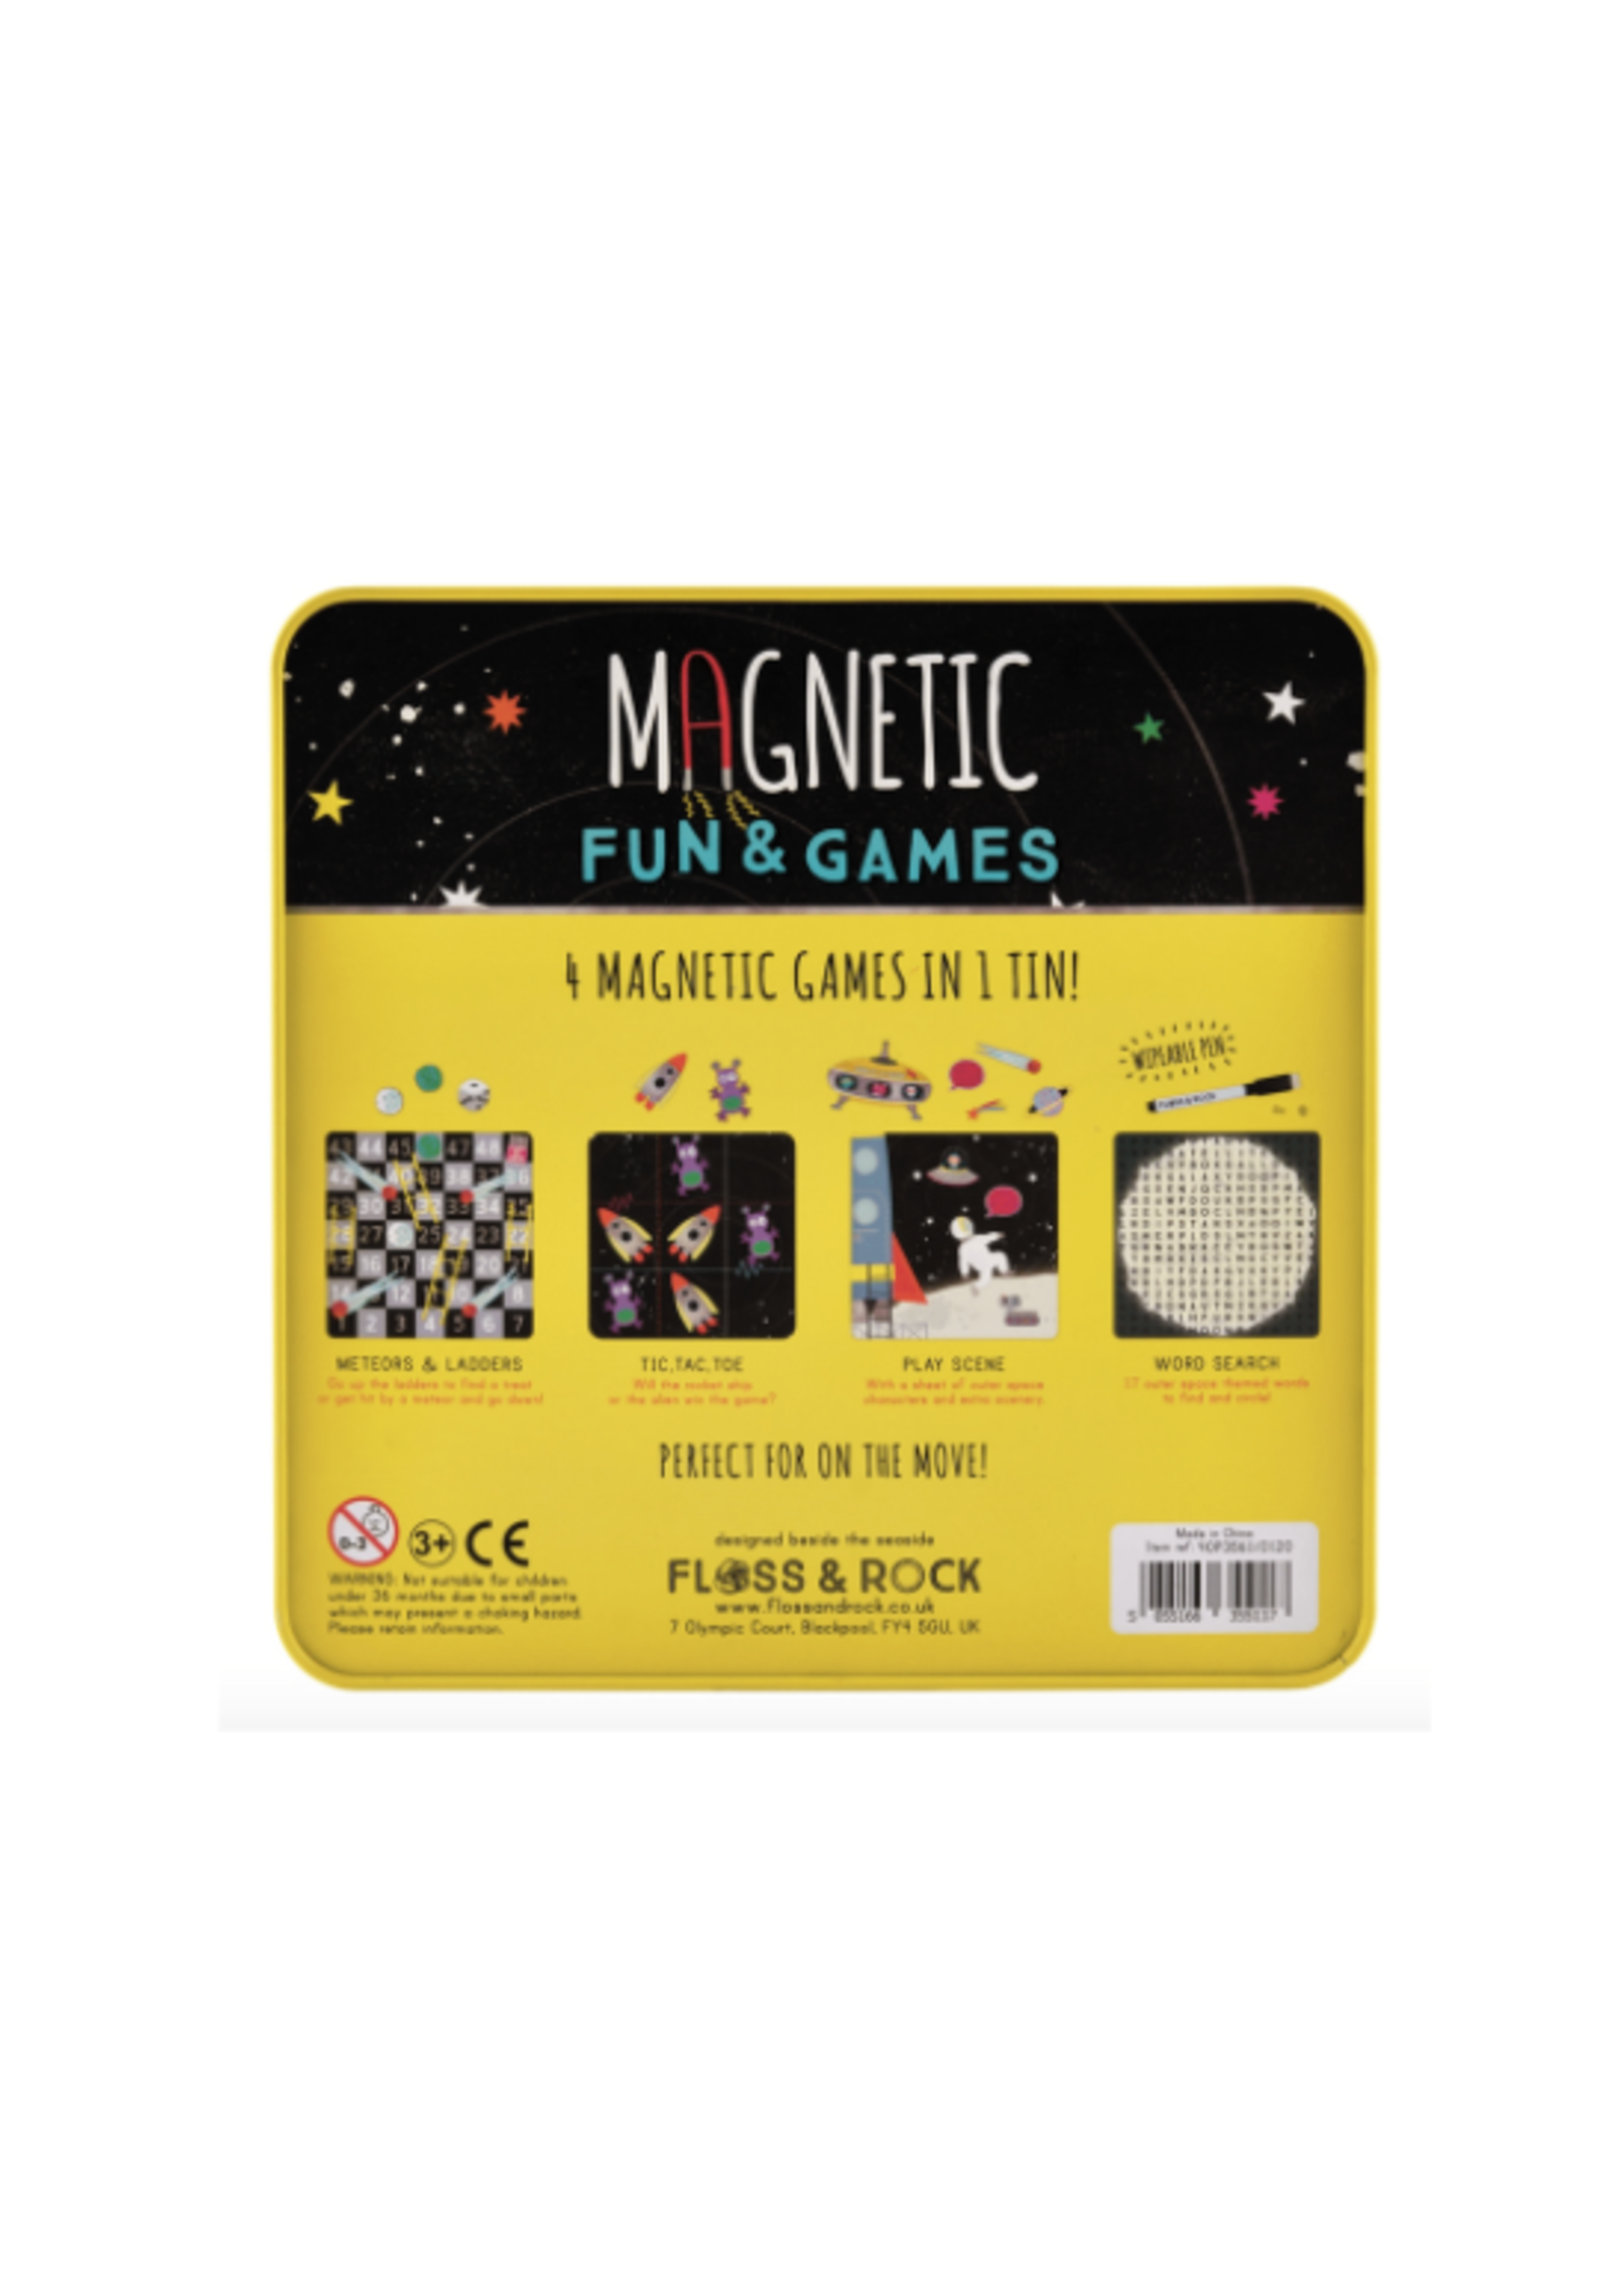 Floss and Rock Space Magnetic Fun & Games